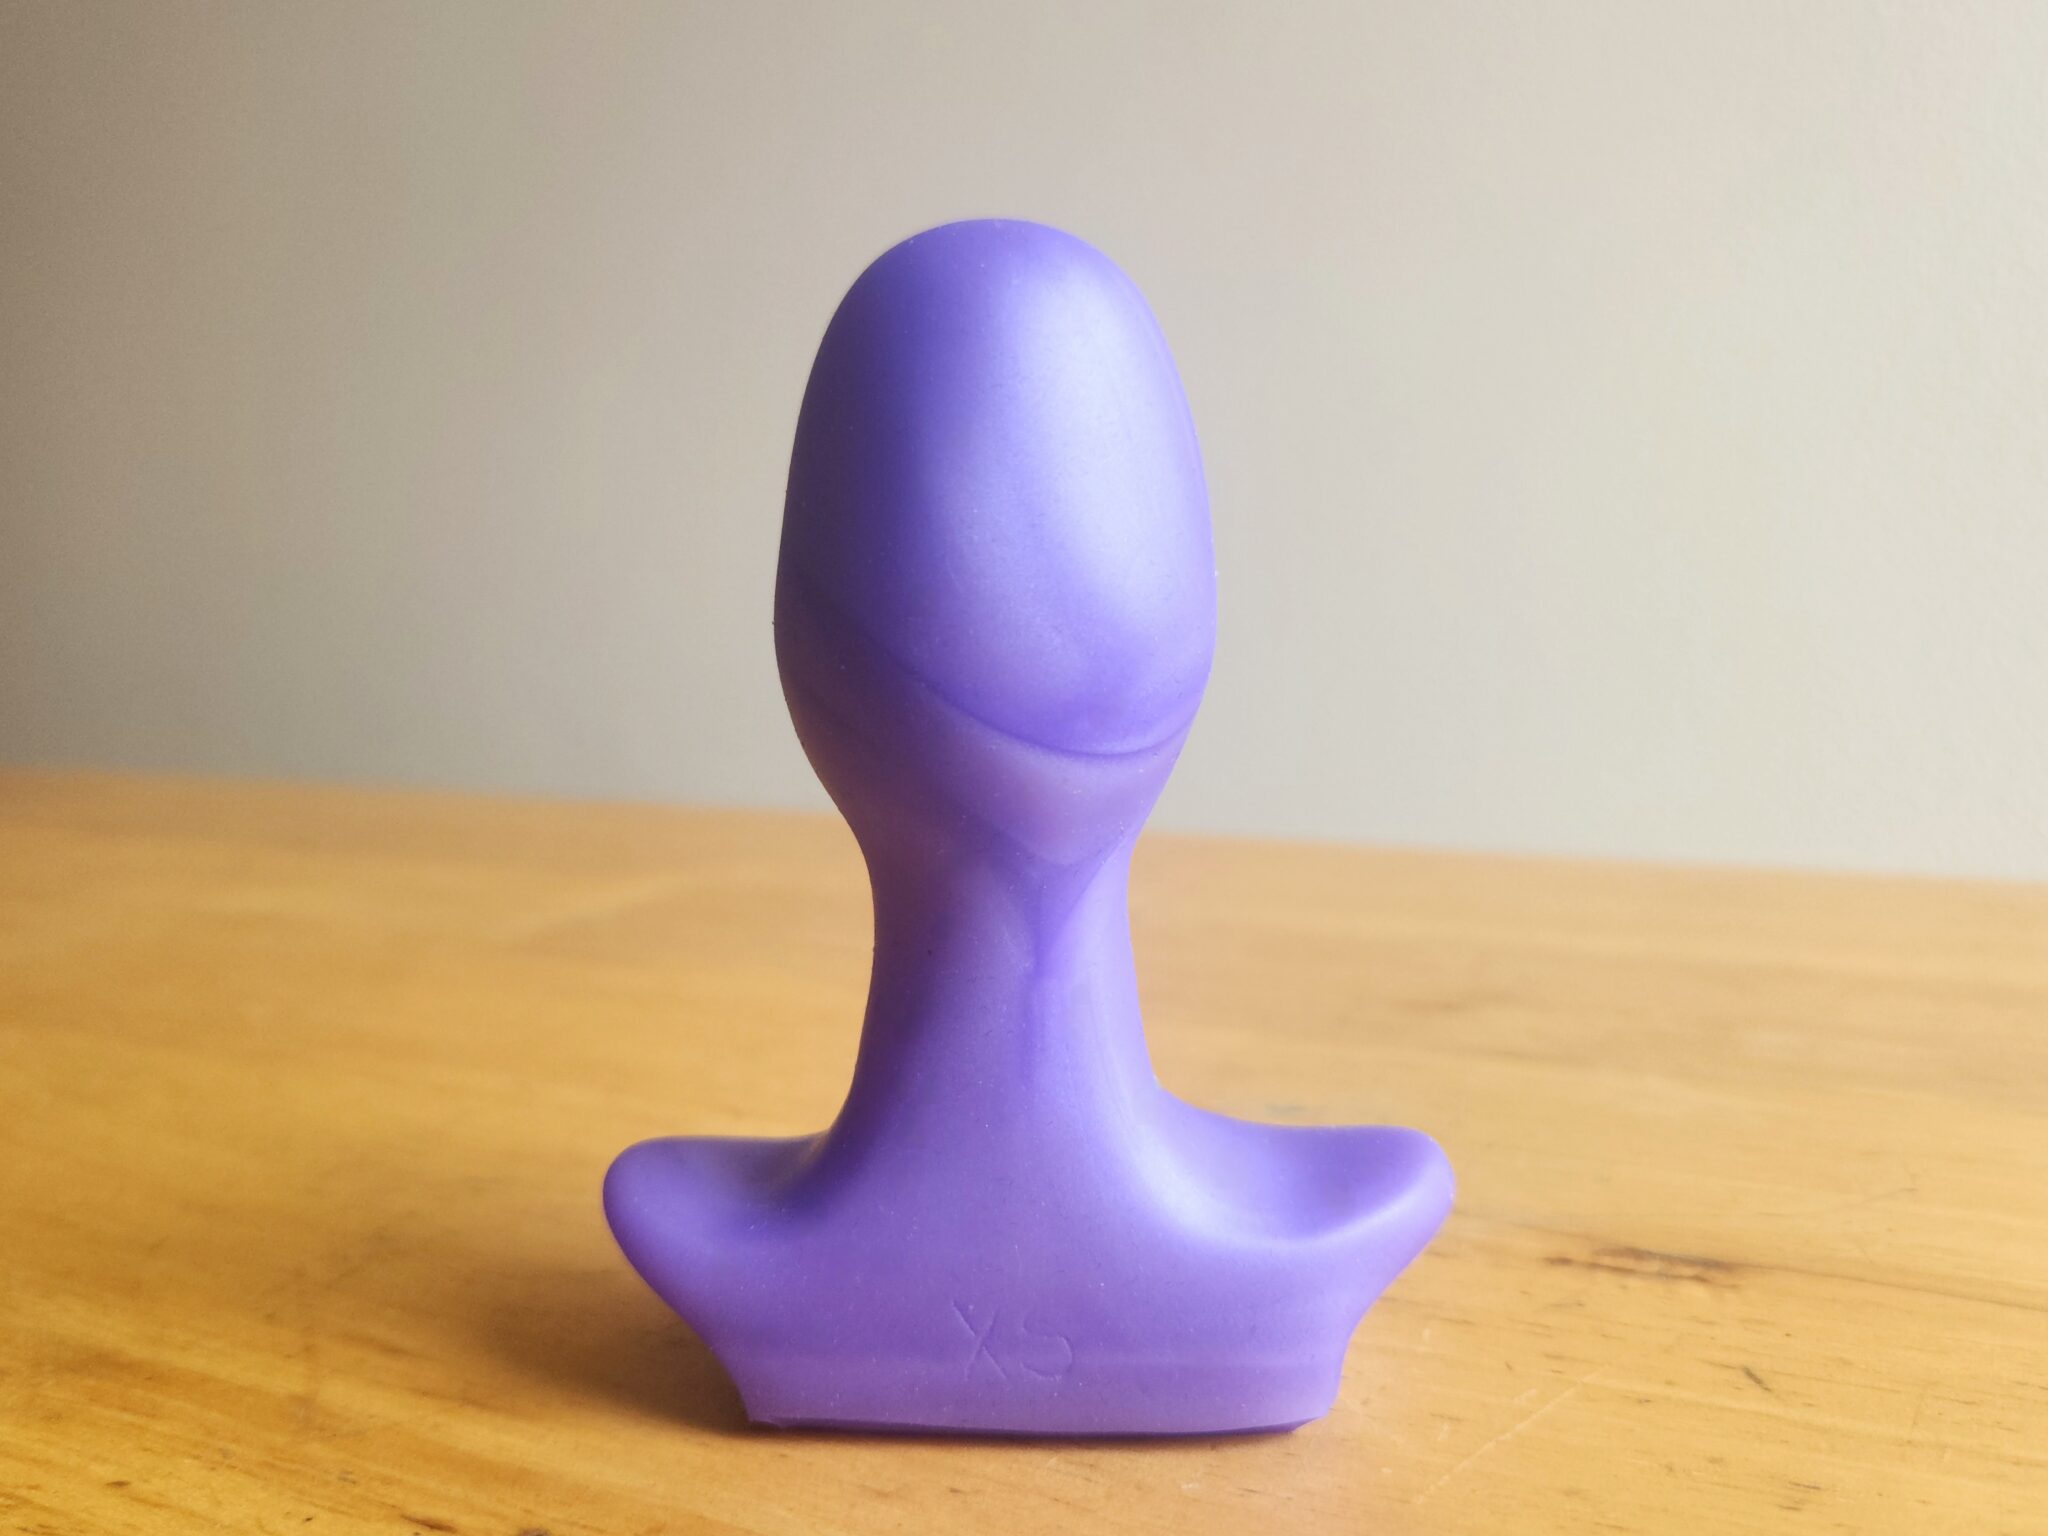 My Personal Experiences with SquarePegToys Egg Plug